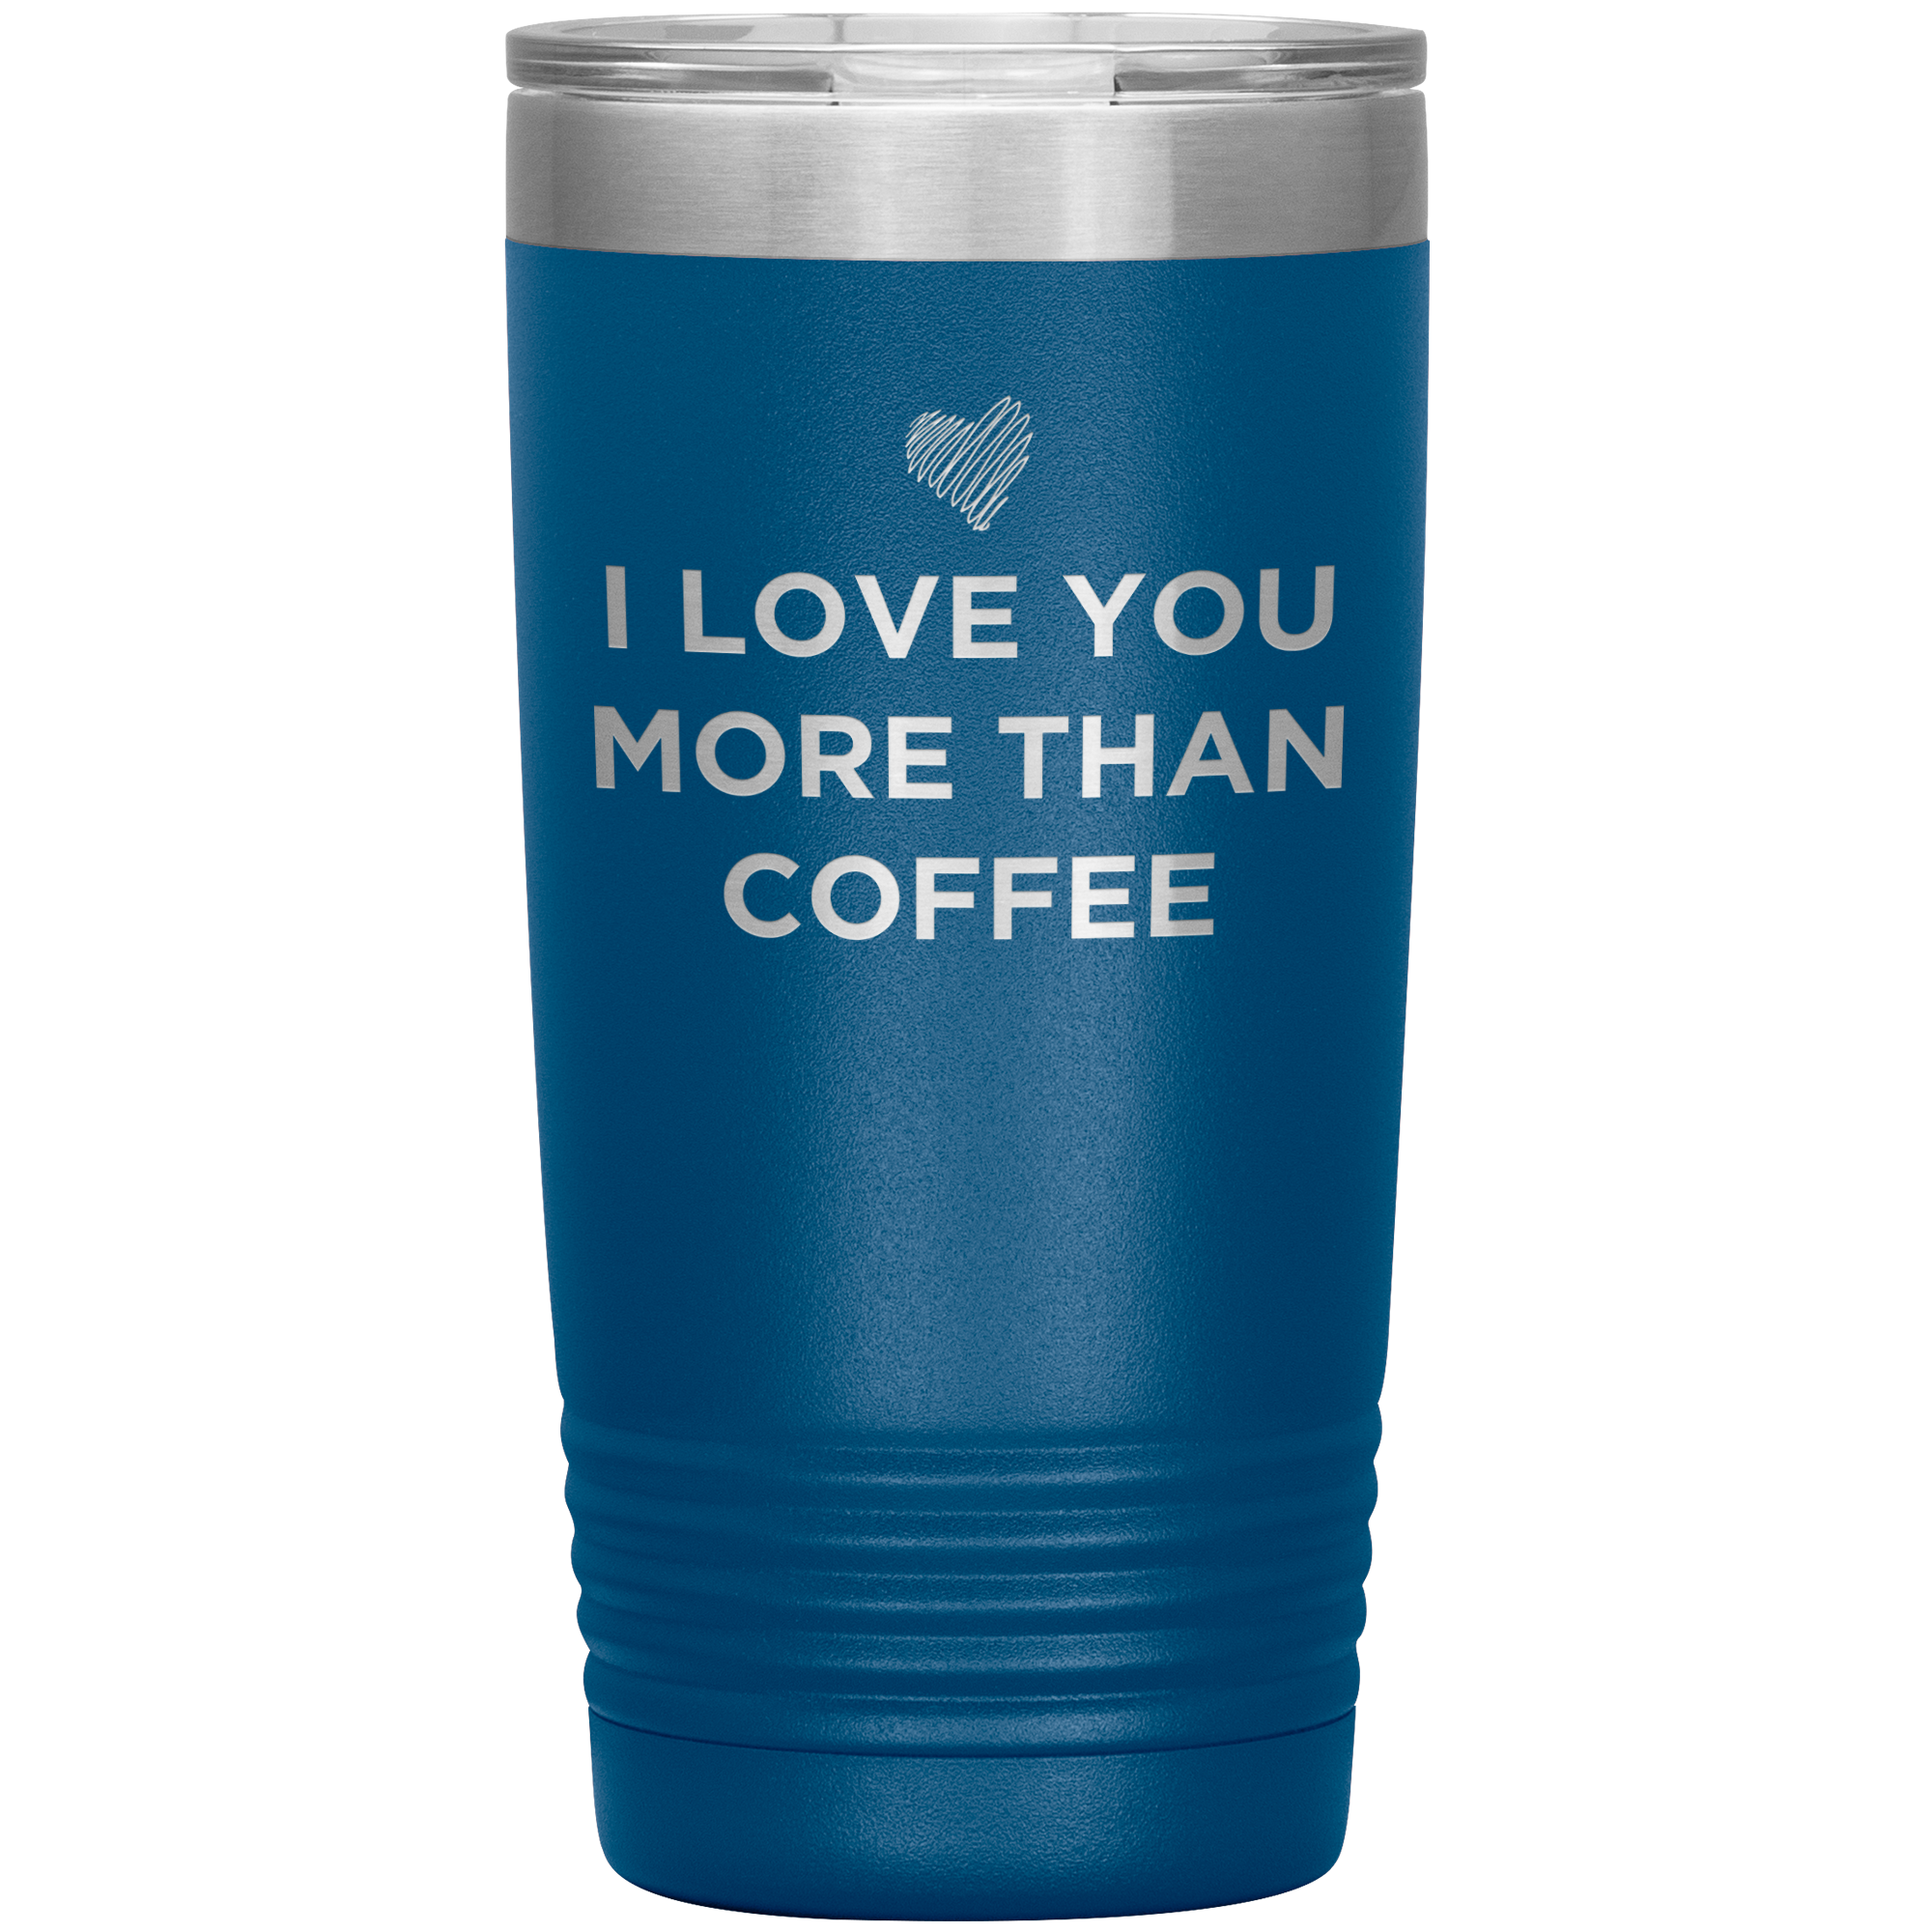 I Love You More Than Coffee - Funny Etched Travel Mug